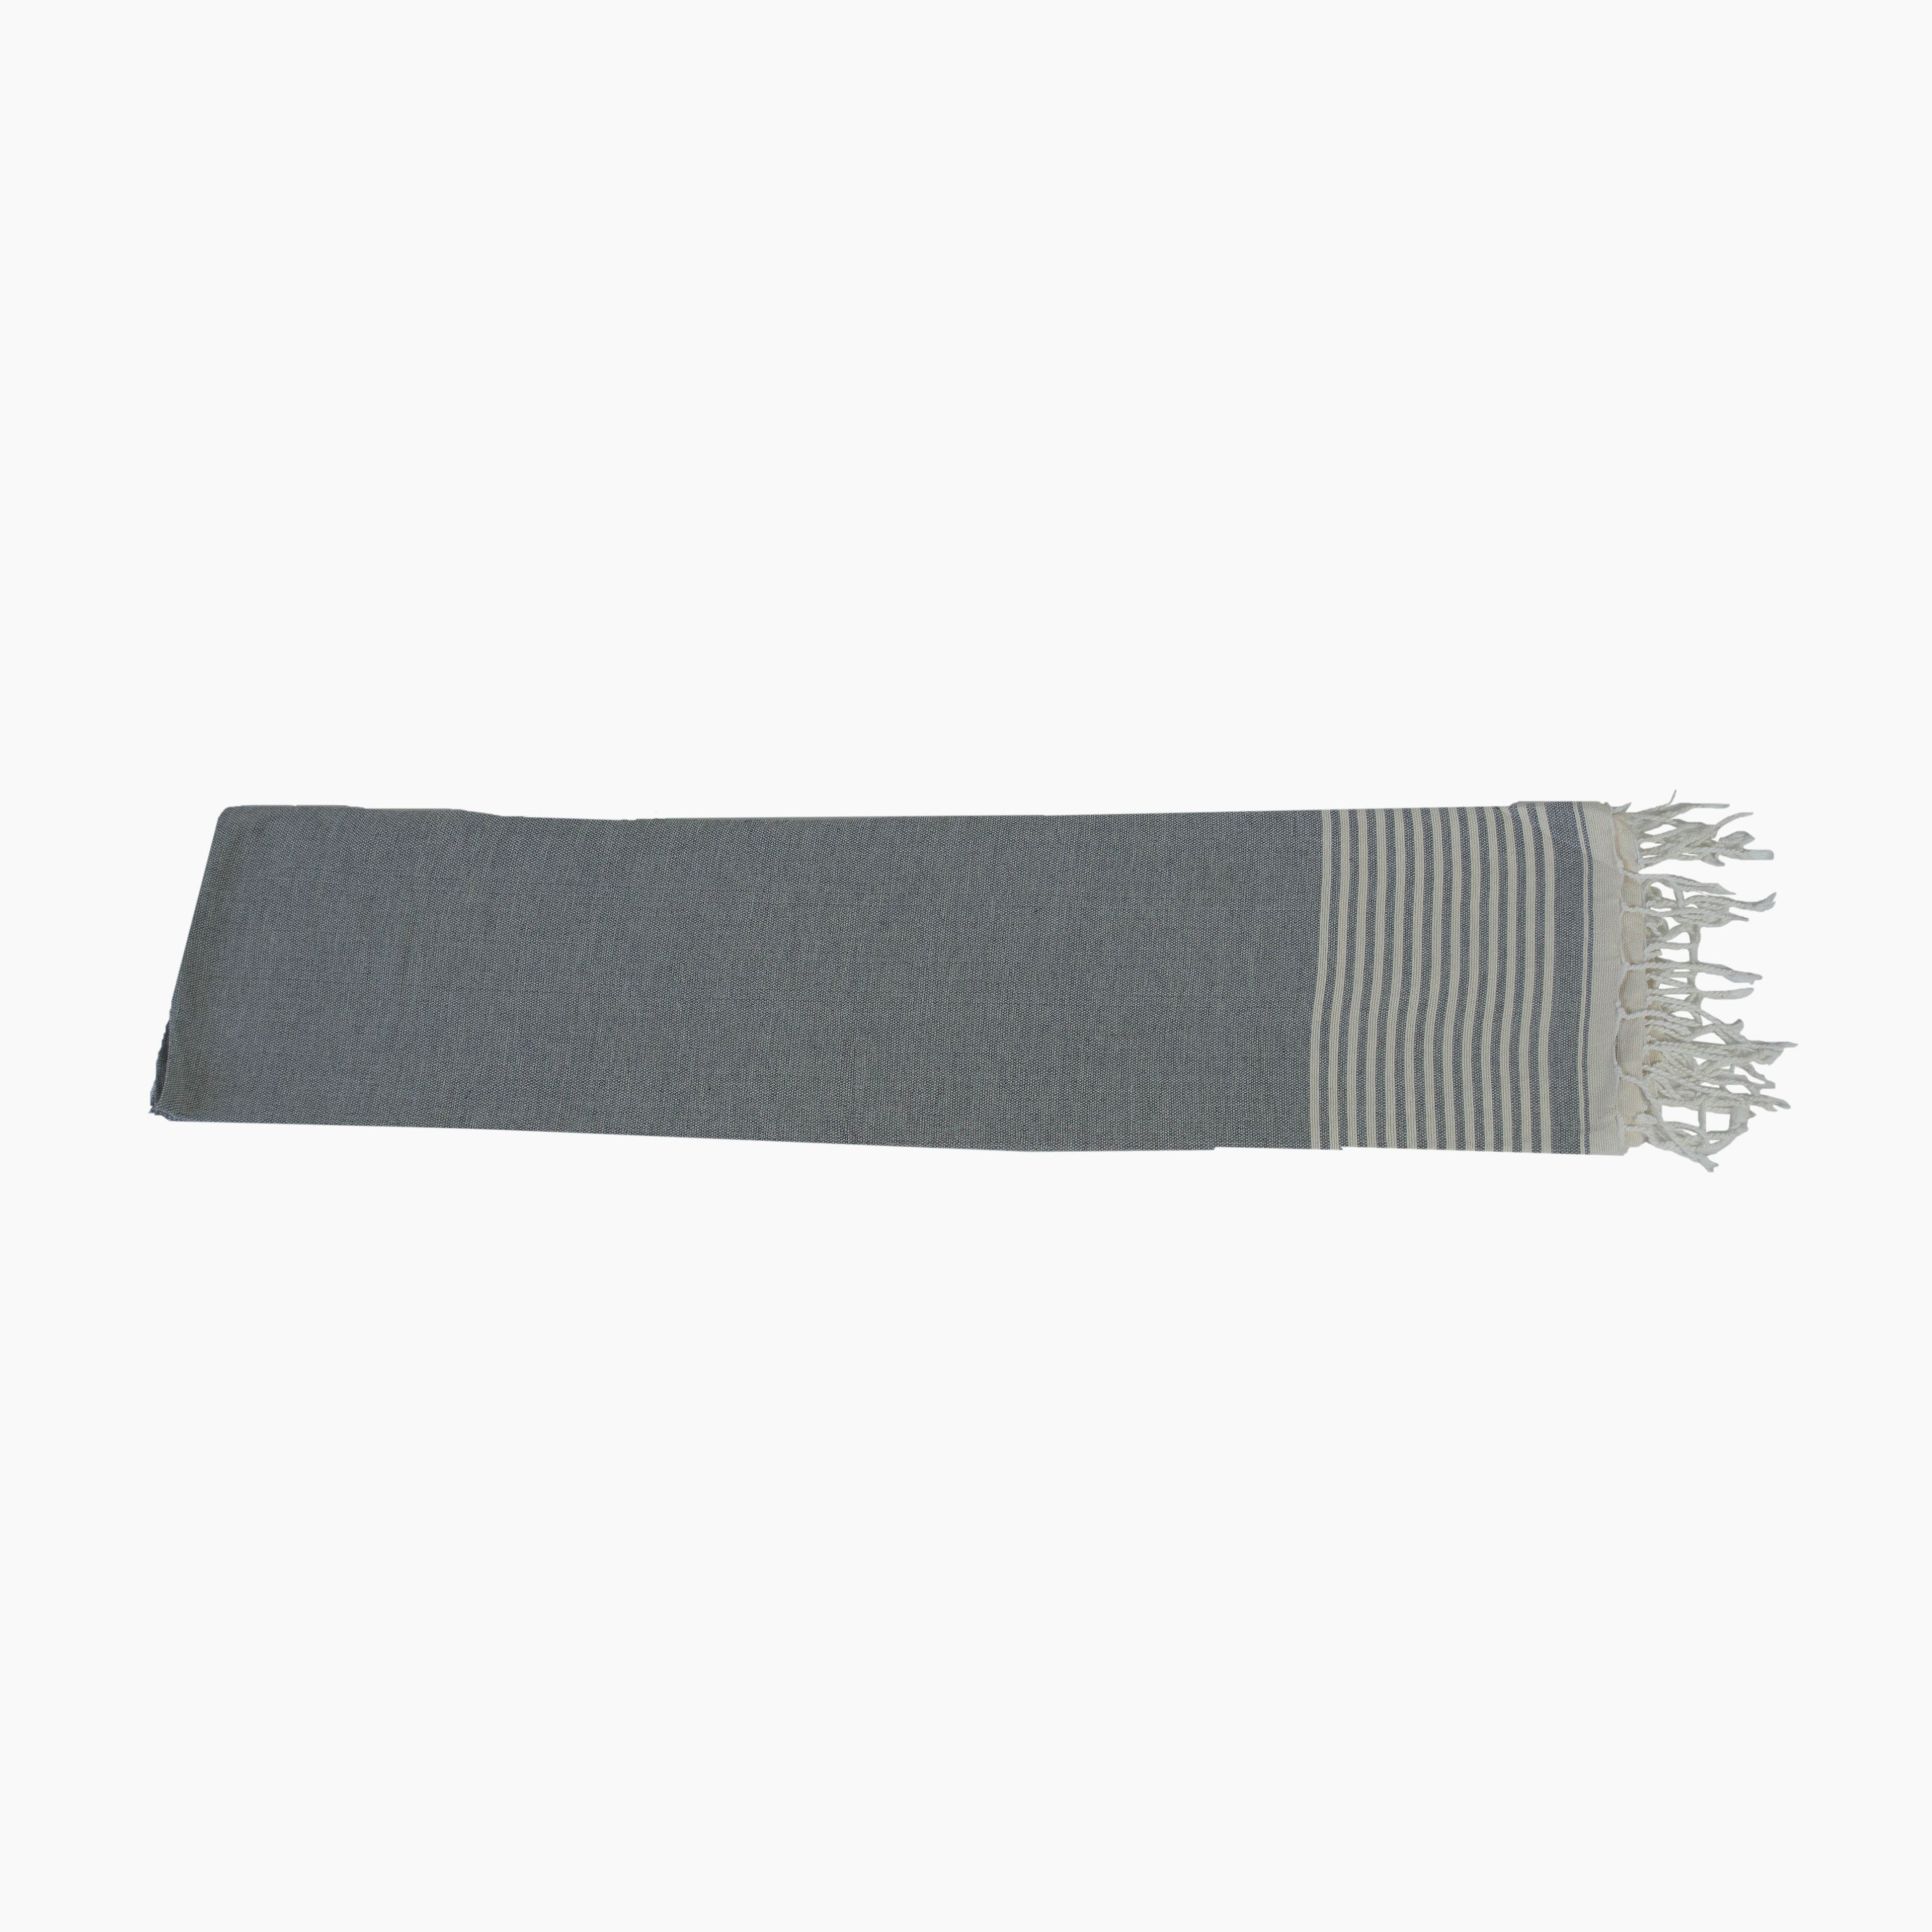 Moroccan Throw/Shawl, Grey with Off-White Stripes